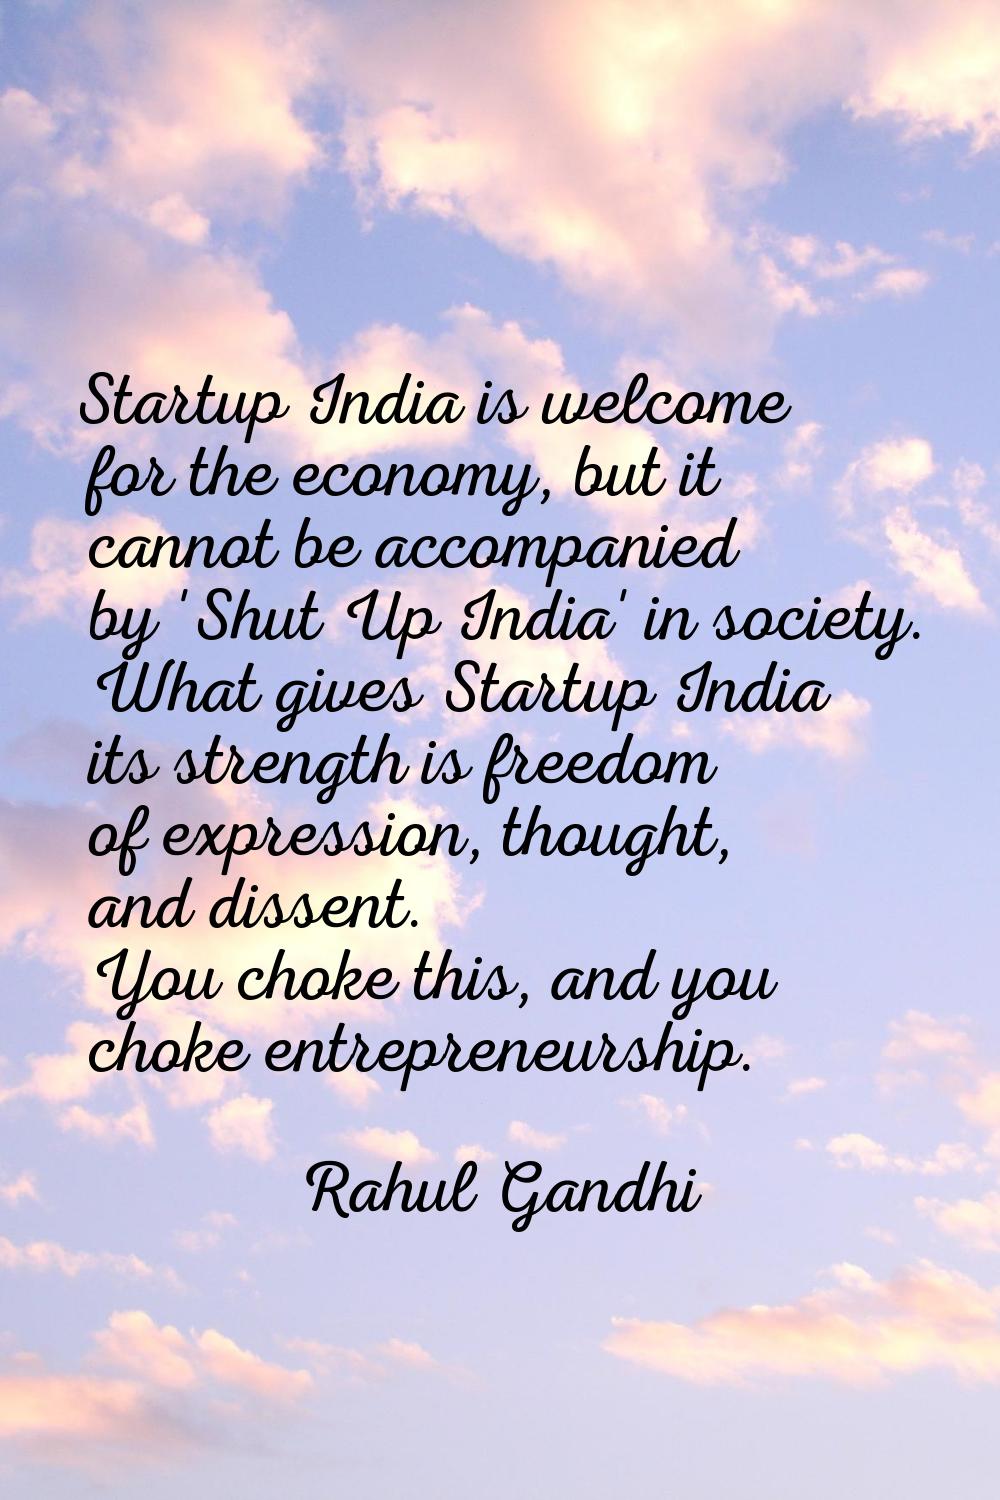 Startup India is welcome for the economy, but it cannot be accompanied by 'Shut Up India' in societ